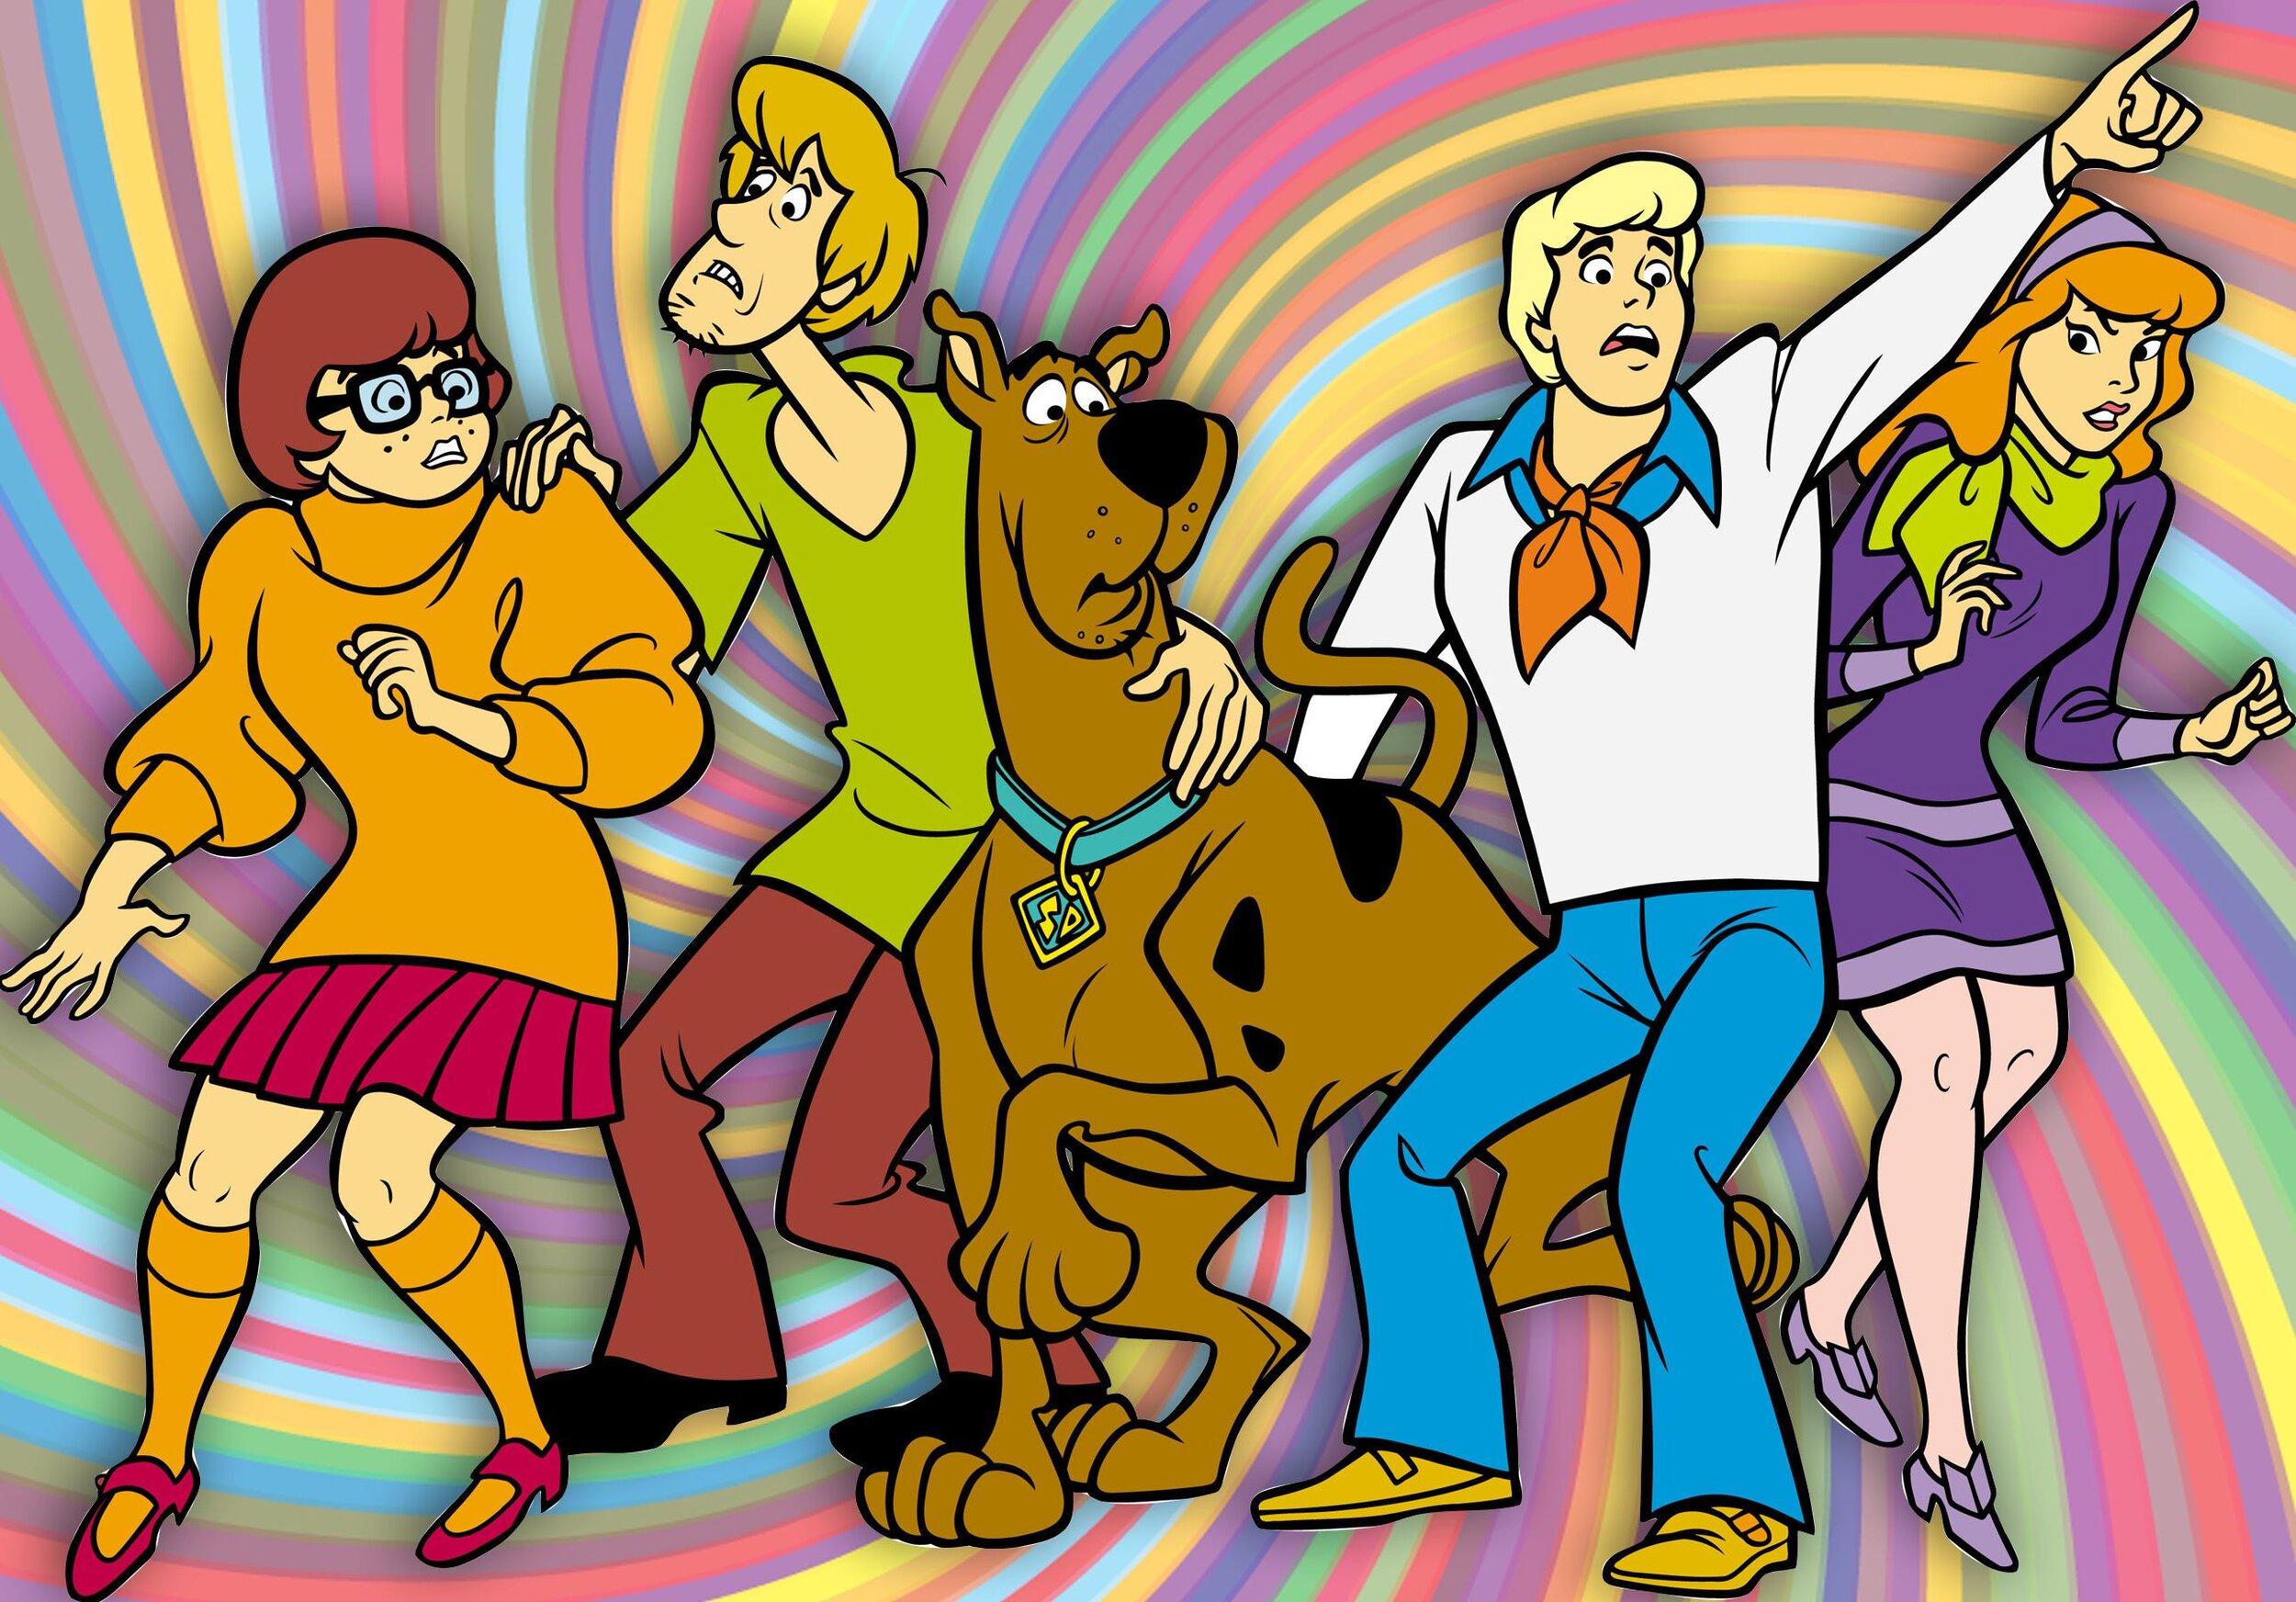 What year did Scooby Doo first air on Saturday morning television?